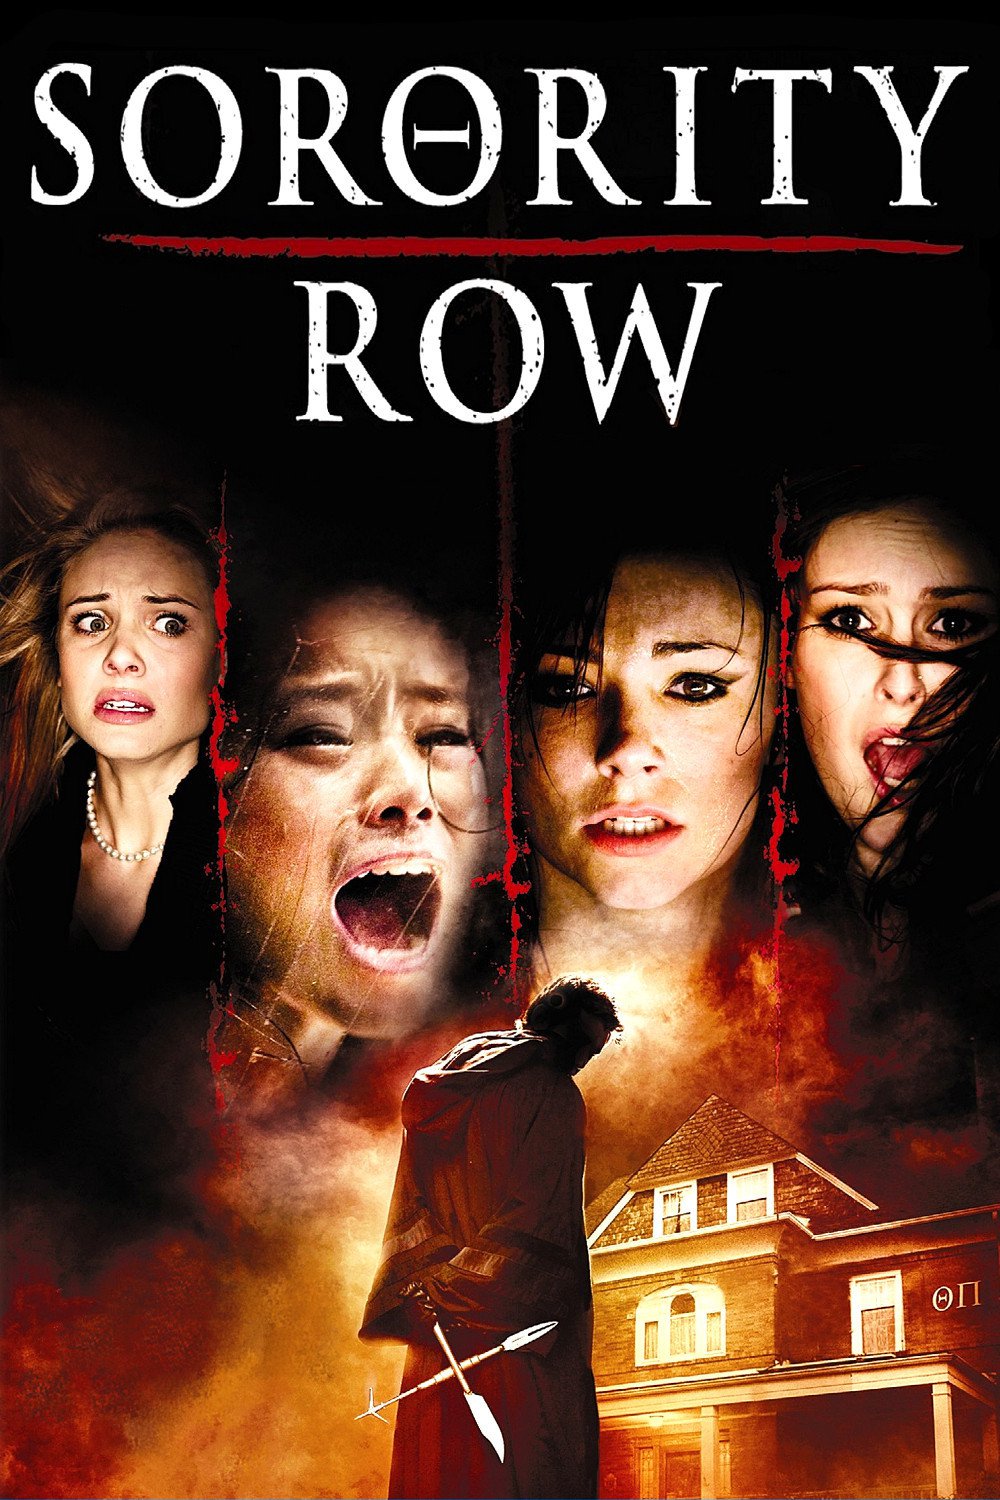 Poster for the movie "Sorority Row"